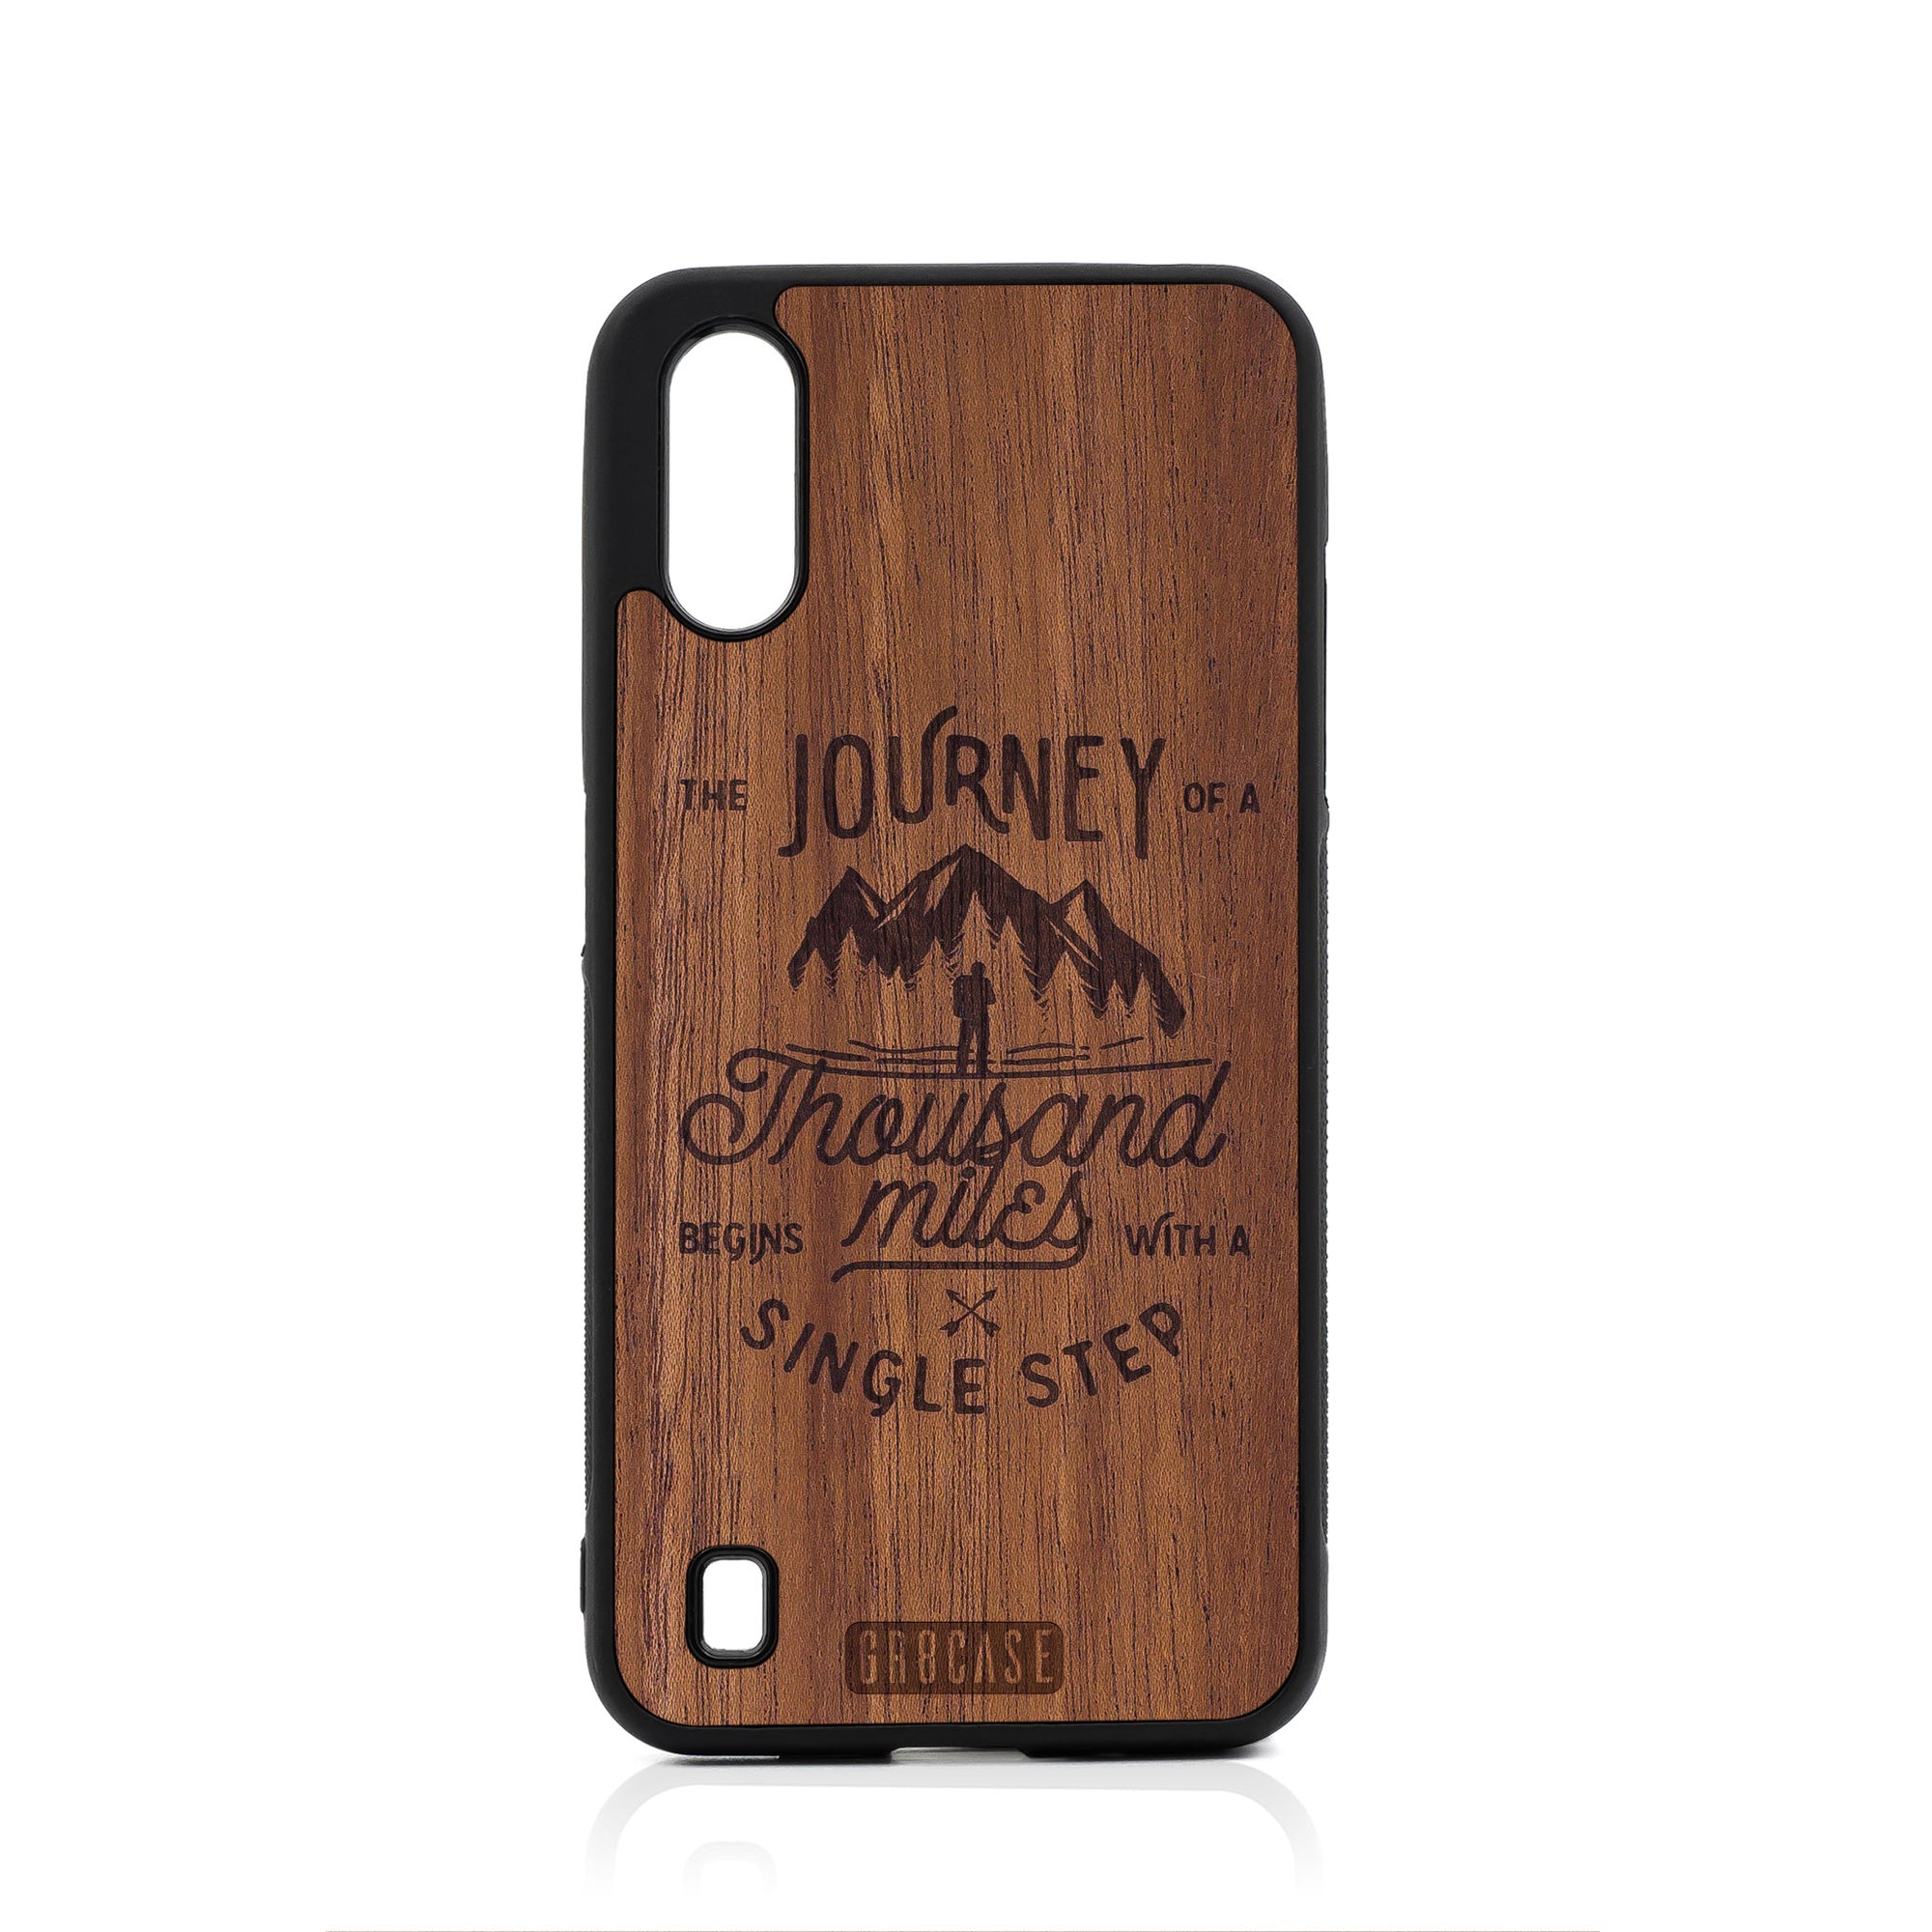 The Journey of A Thousand Miles Begins With A Single Step Design Wood Case For Samsung Galaxy A01